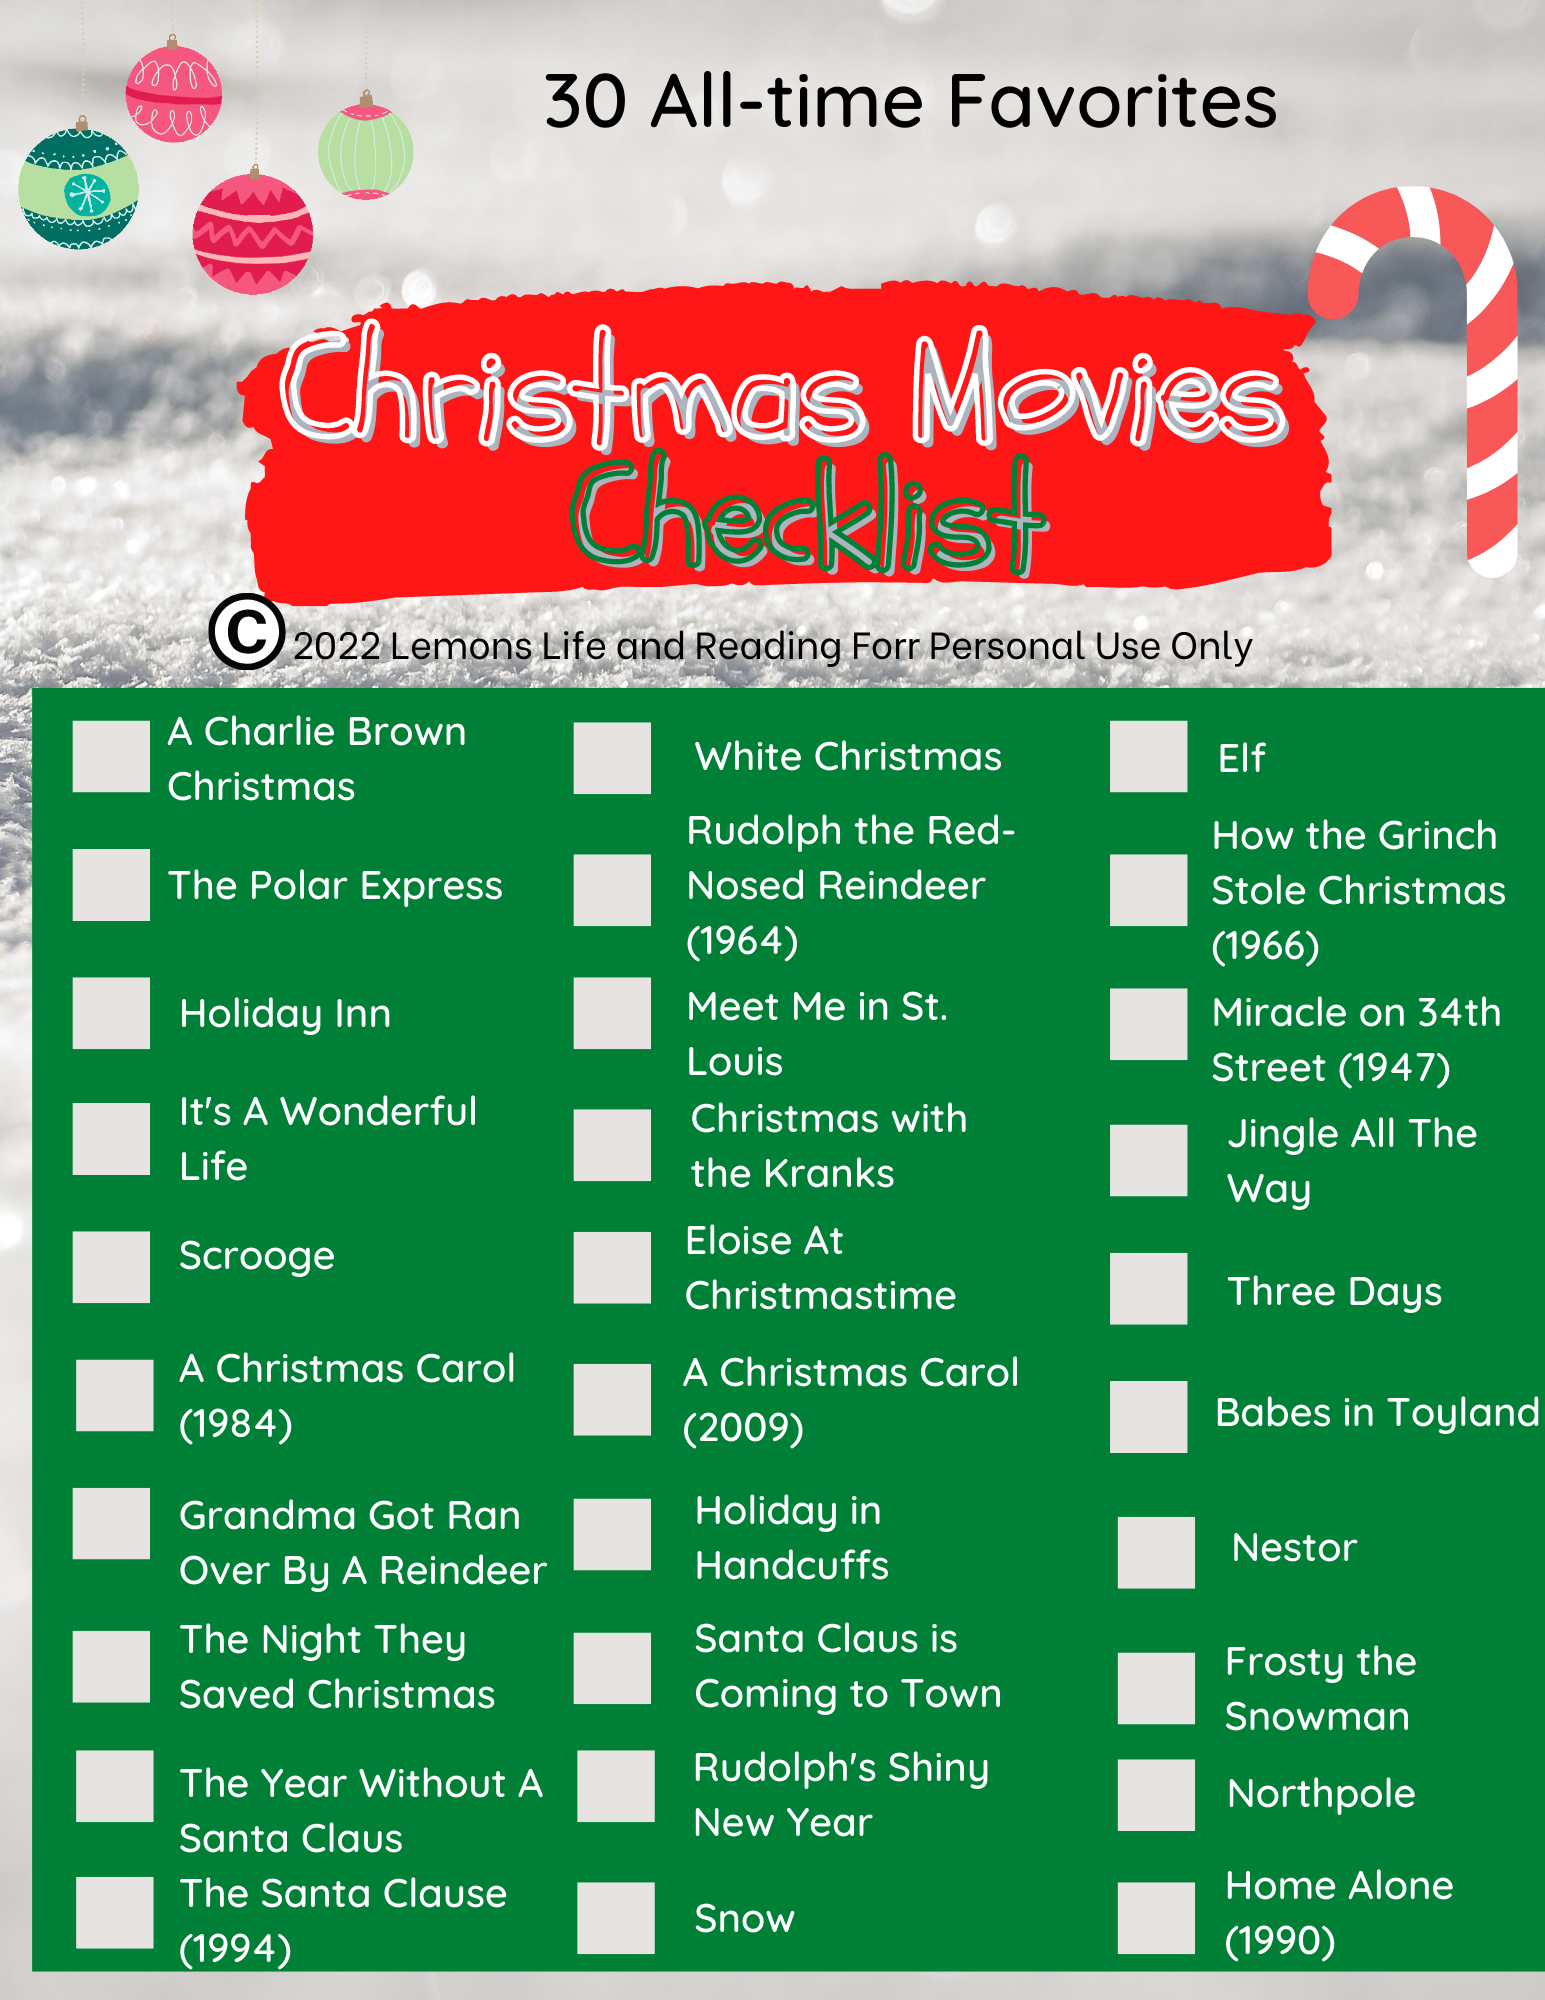 30 Classic Christmas Movies to Watch this Holiday Season